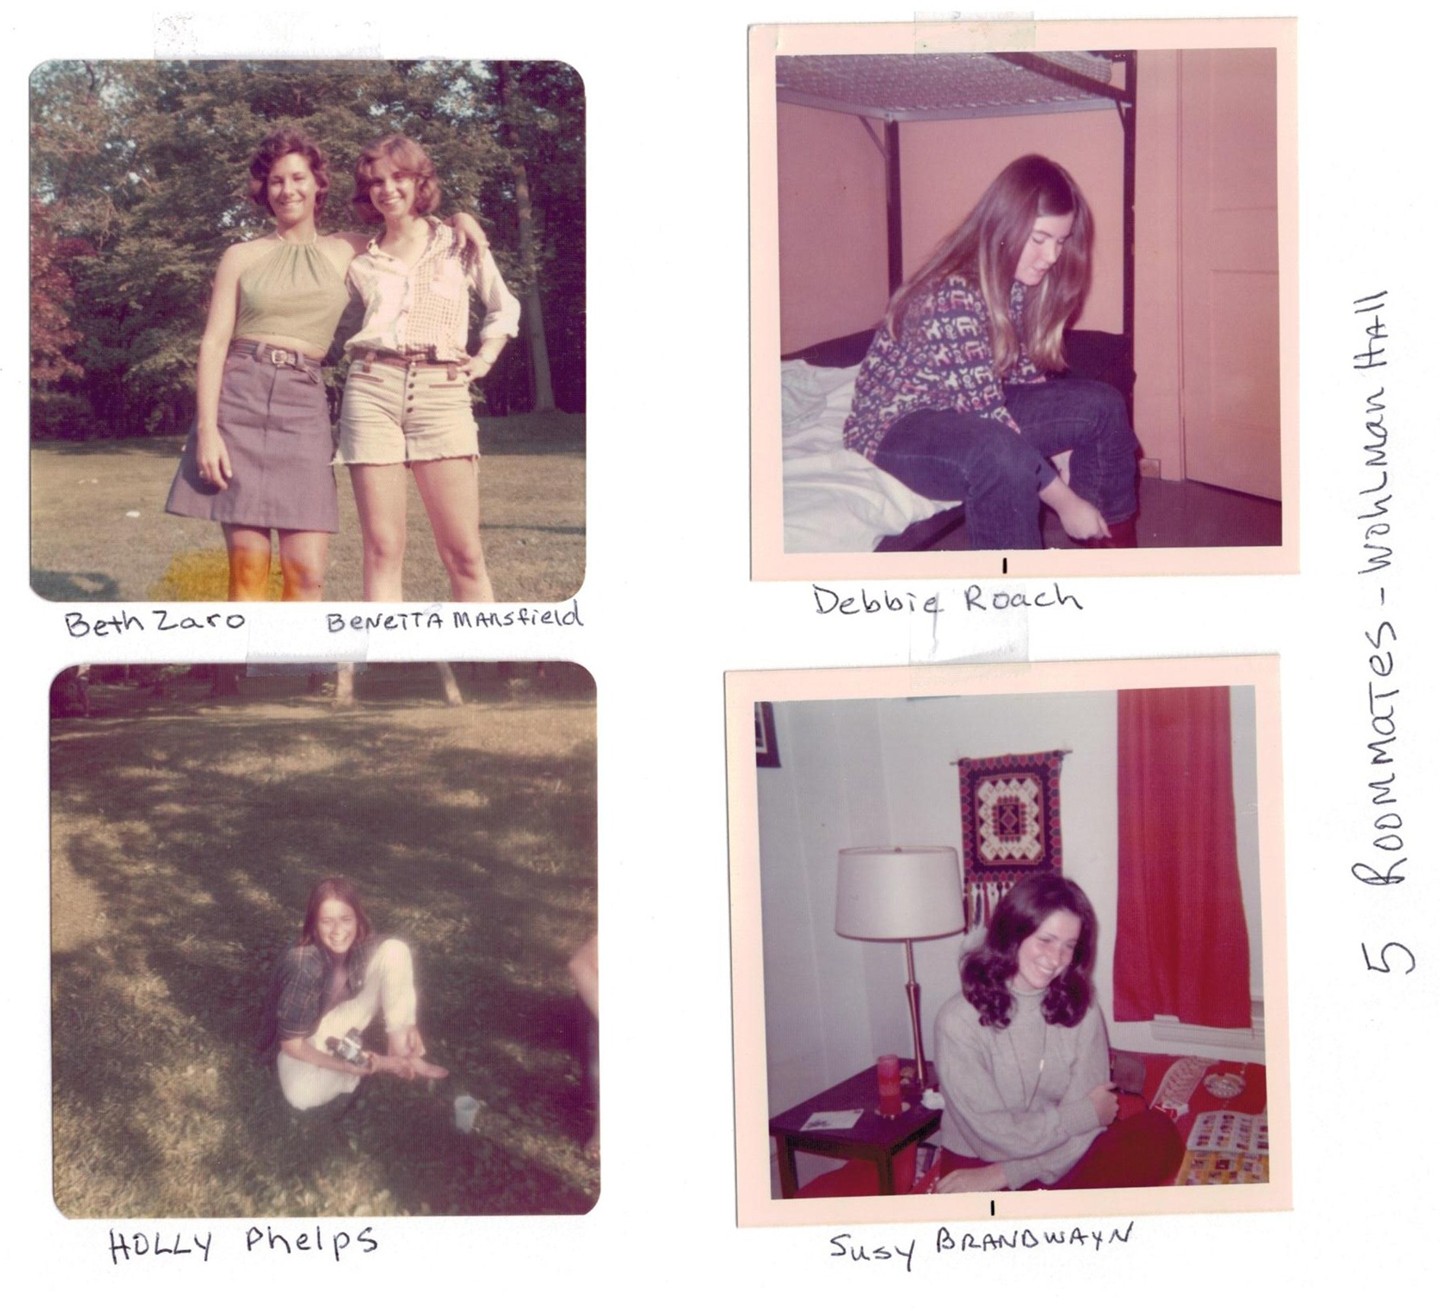 Four photos show five friends from the '70s